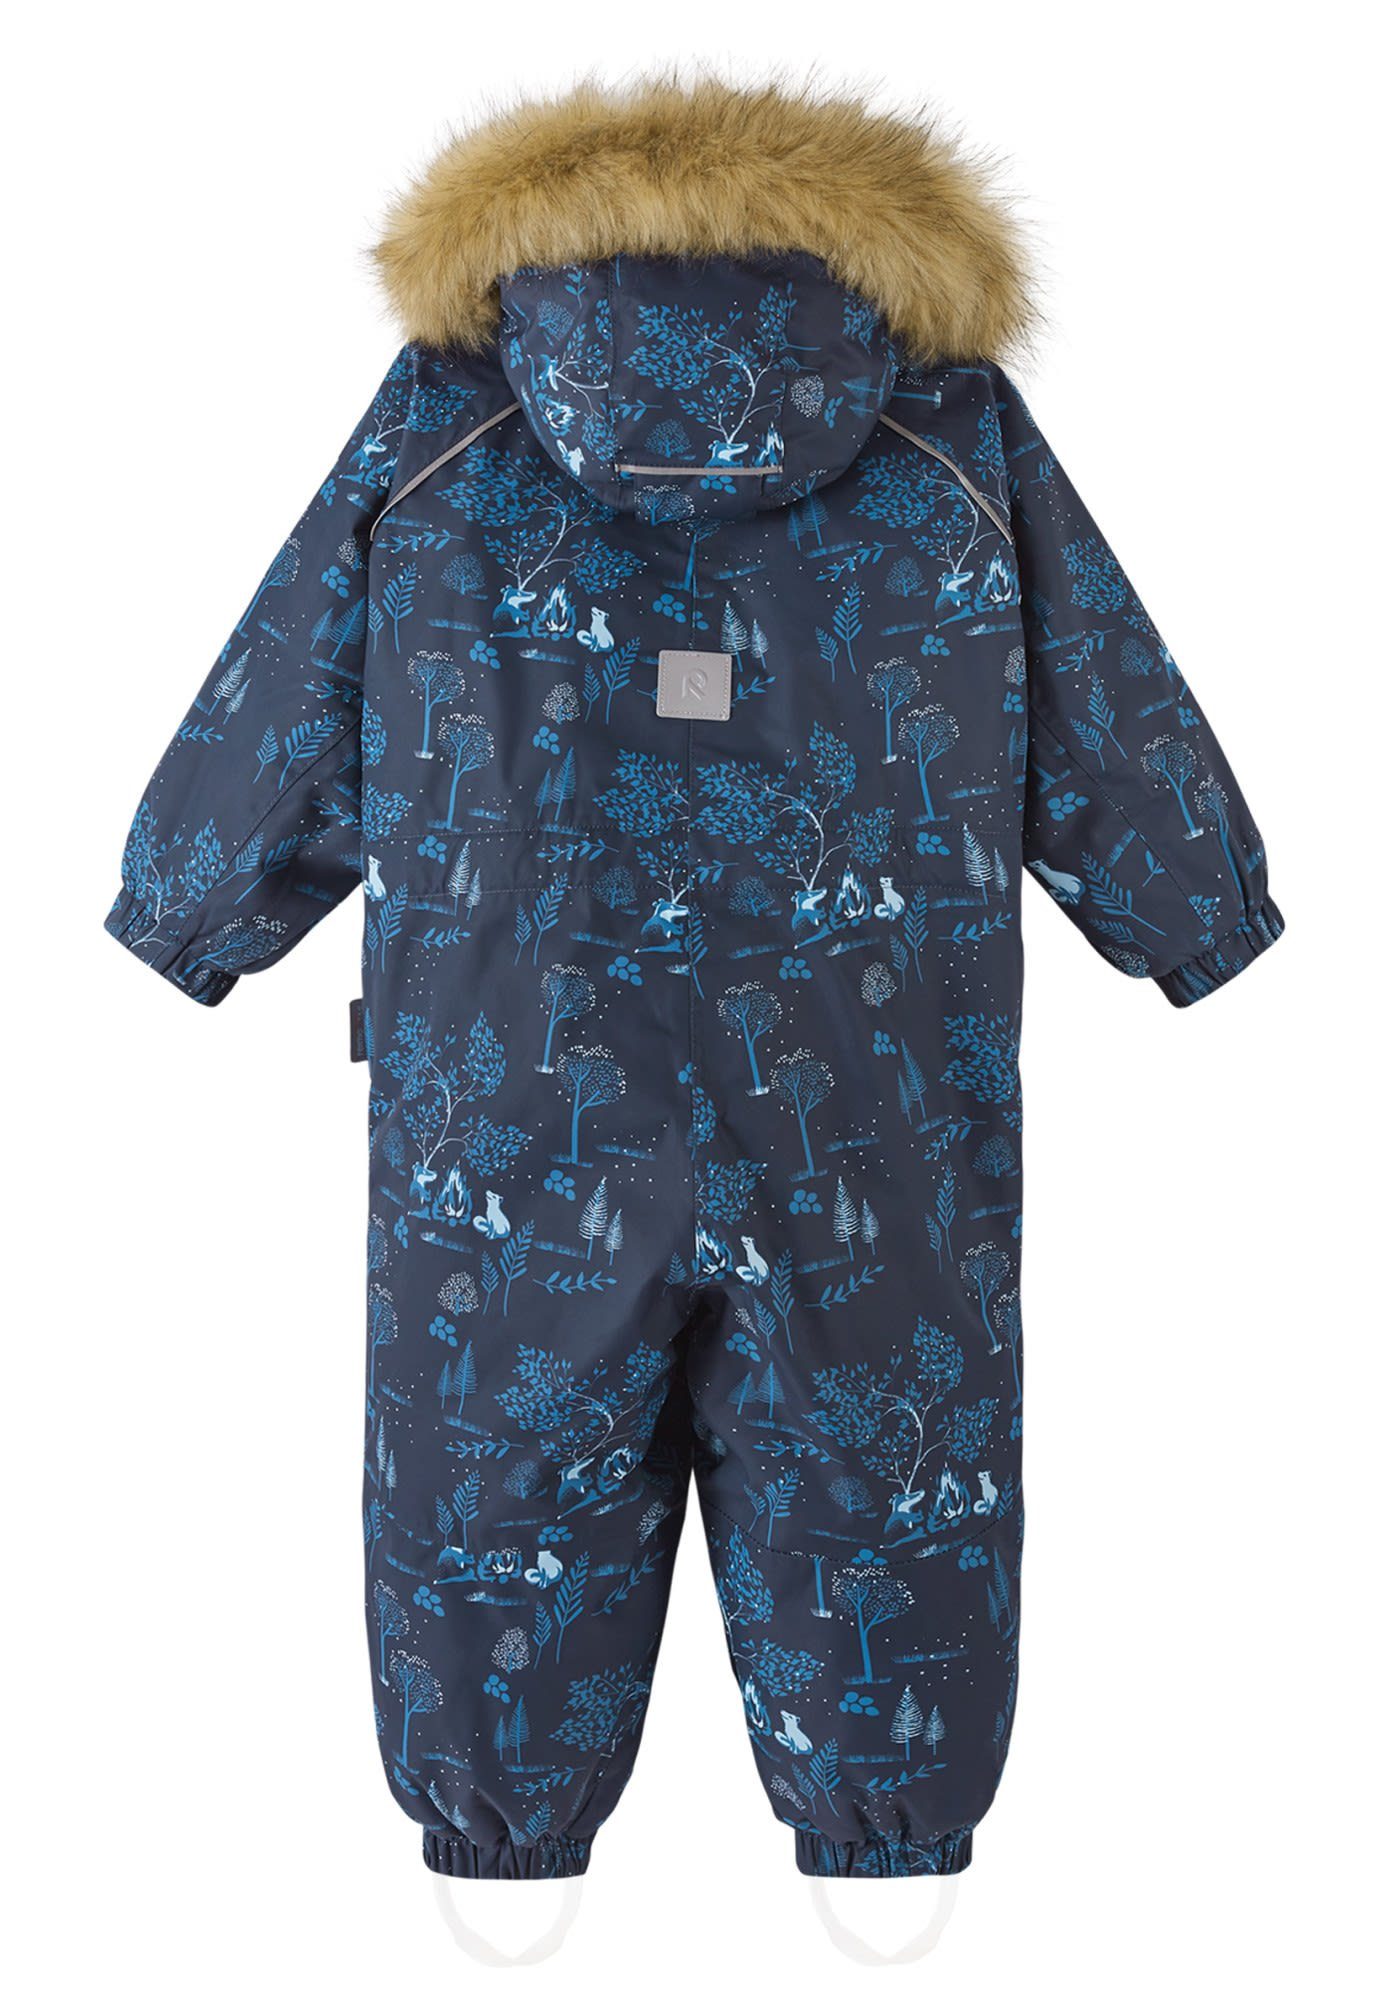 Navy Overall reima Toddlers Lappi Reima Kinder Overall Winter